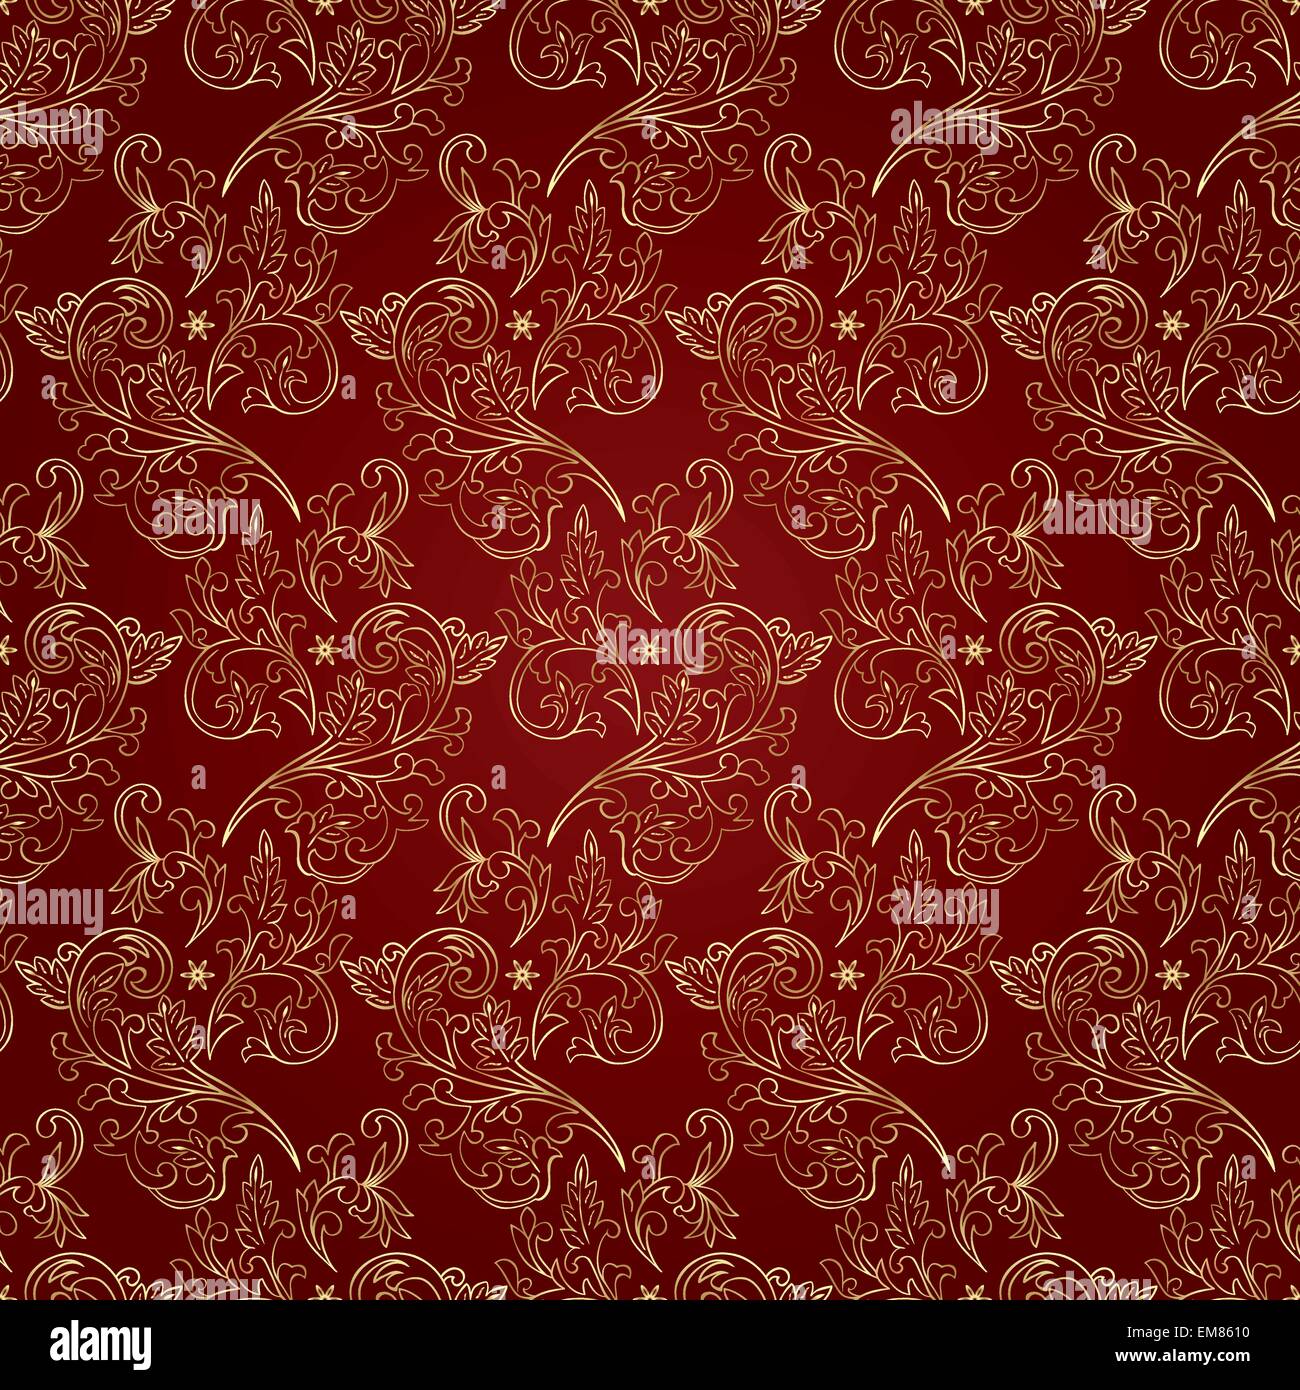 Floral vintage seamless pattern on red background Stock Vector